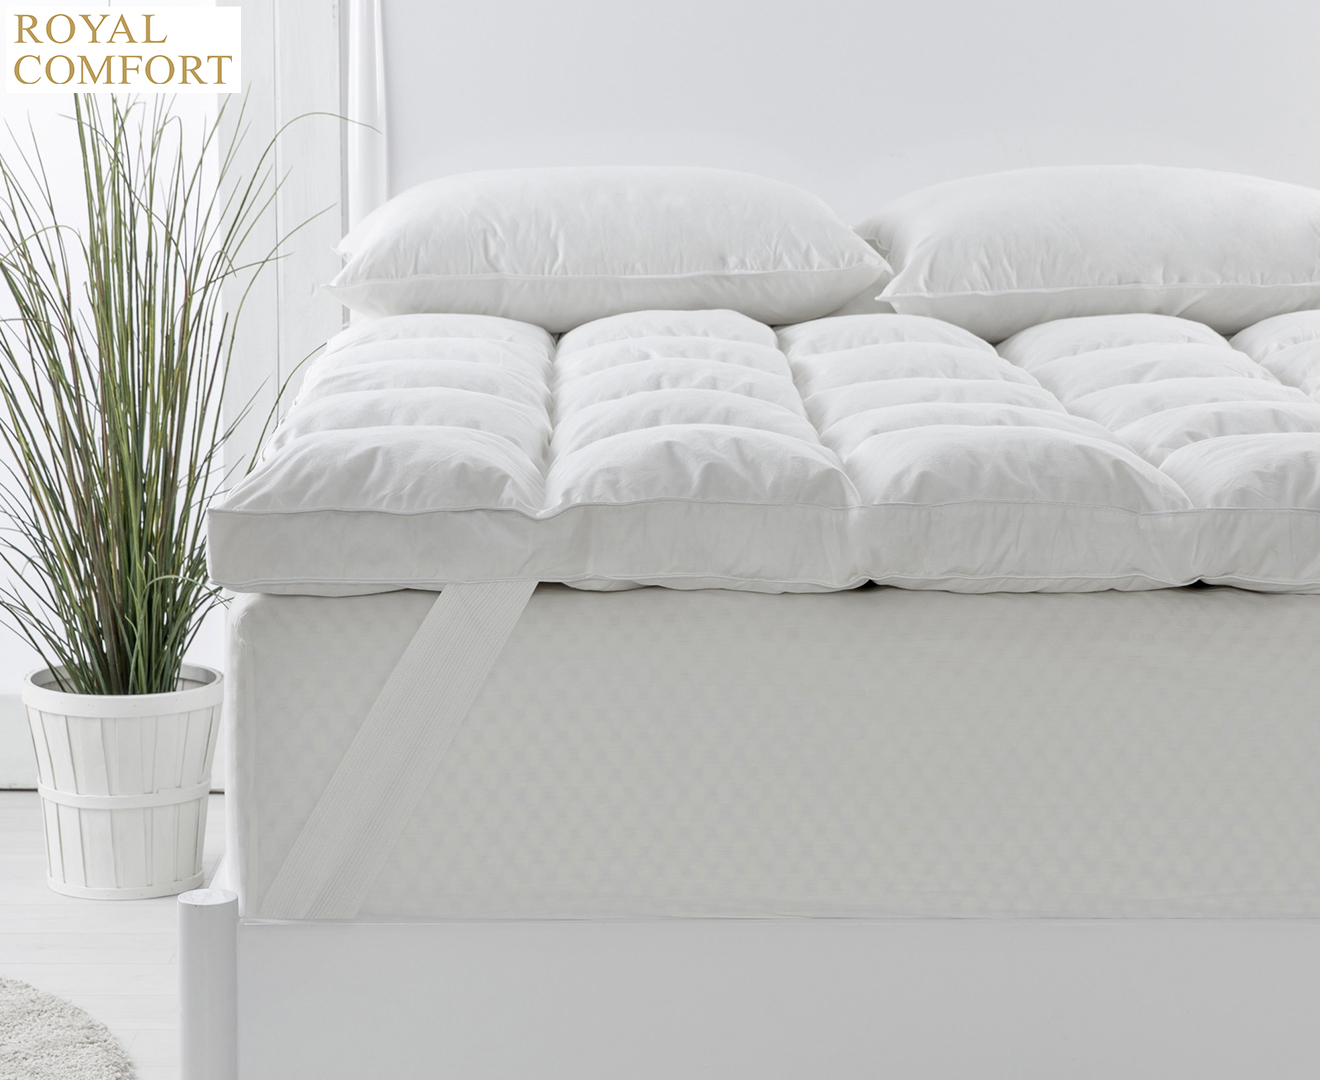 royal comfort duck feather and down mattress topper